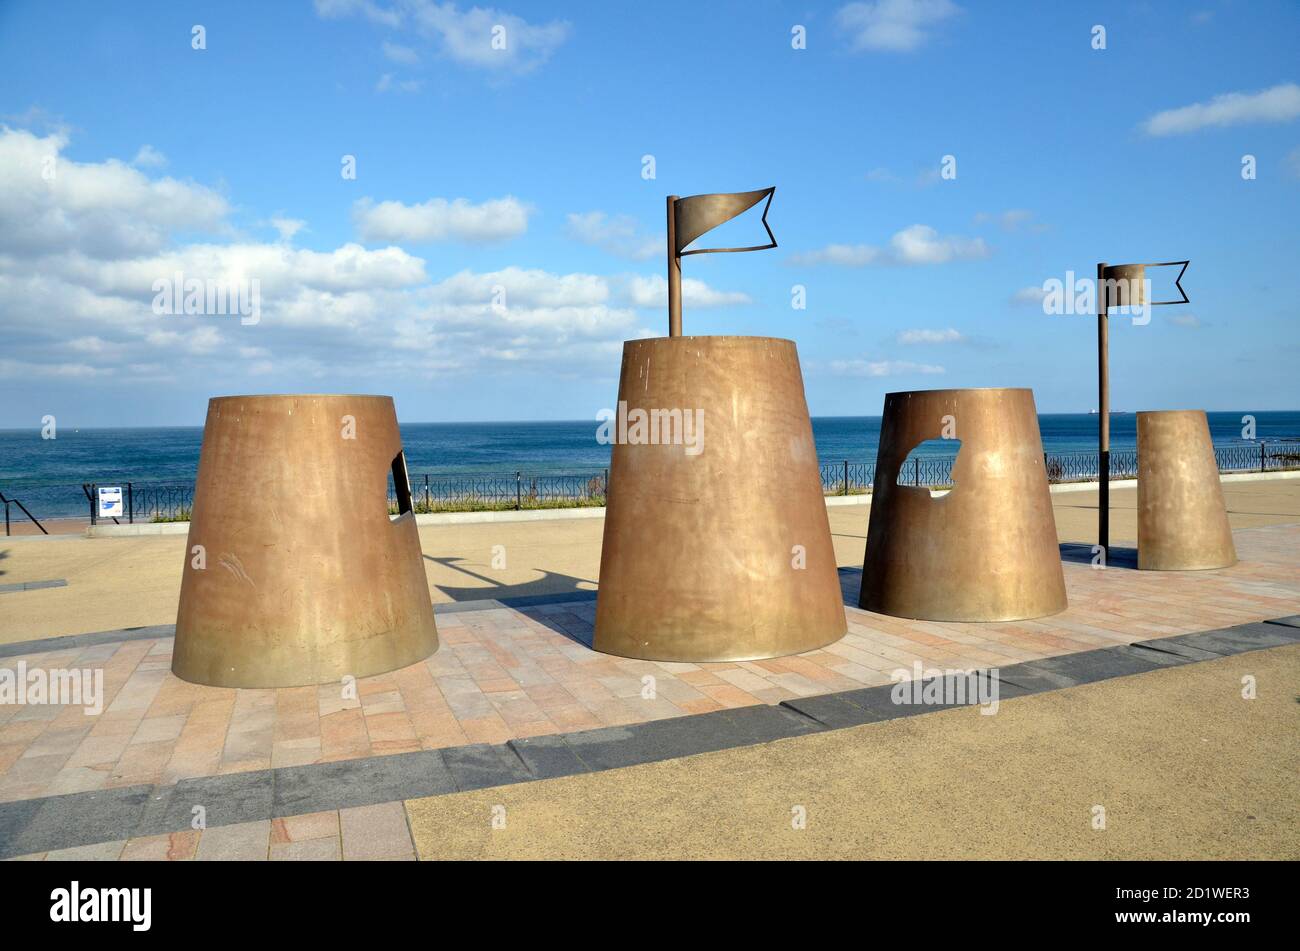 Sculptures on the seafront at Whitley Bay in Tyne & Wear. Stock Photo